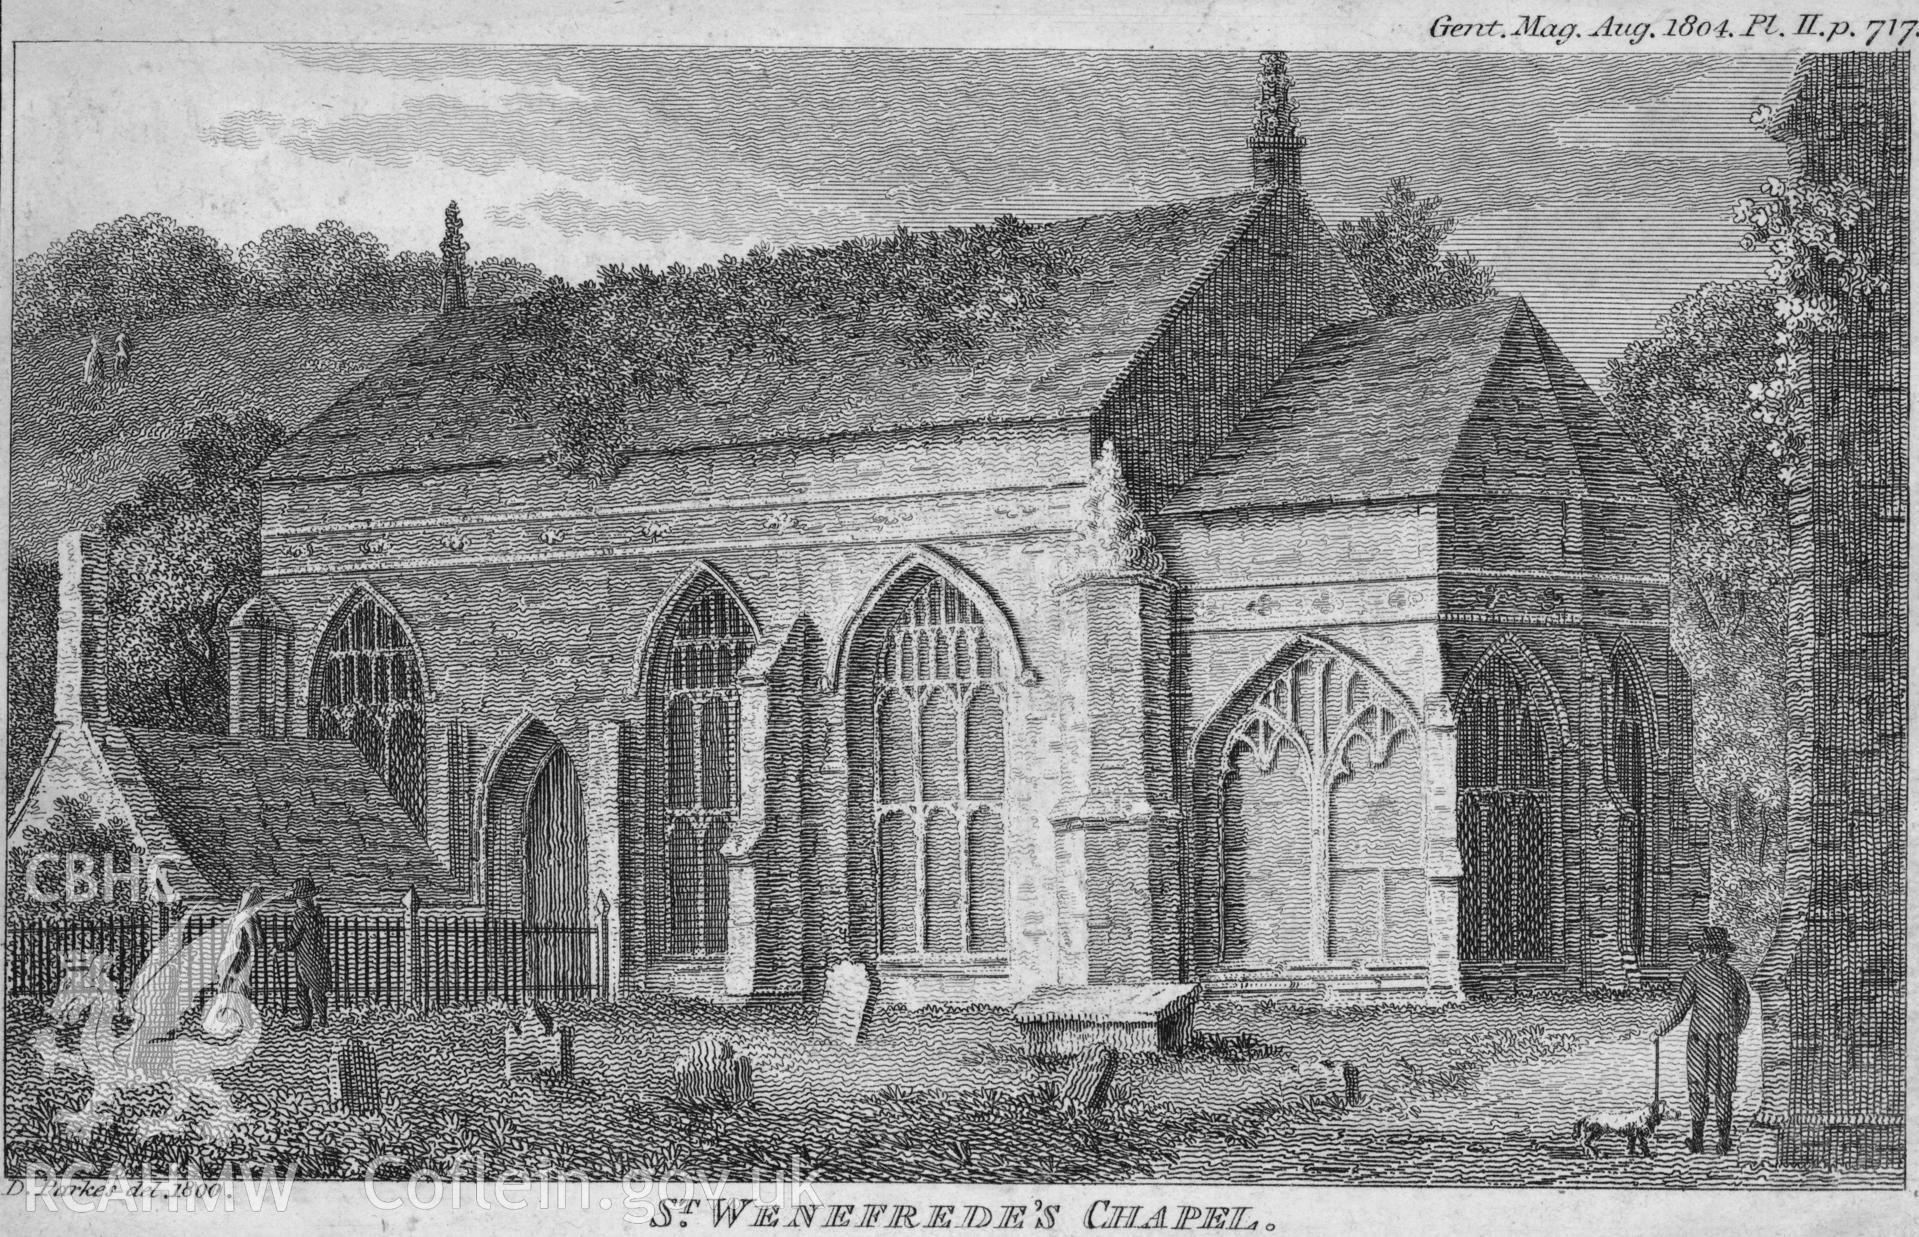 Digital copy of an etching showing St Winifrede's Well.